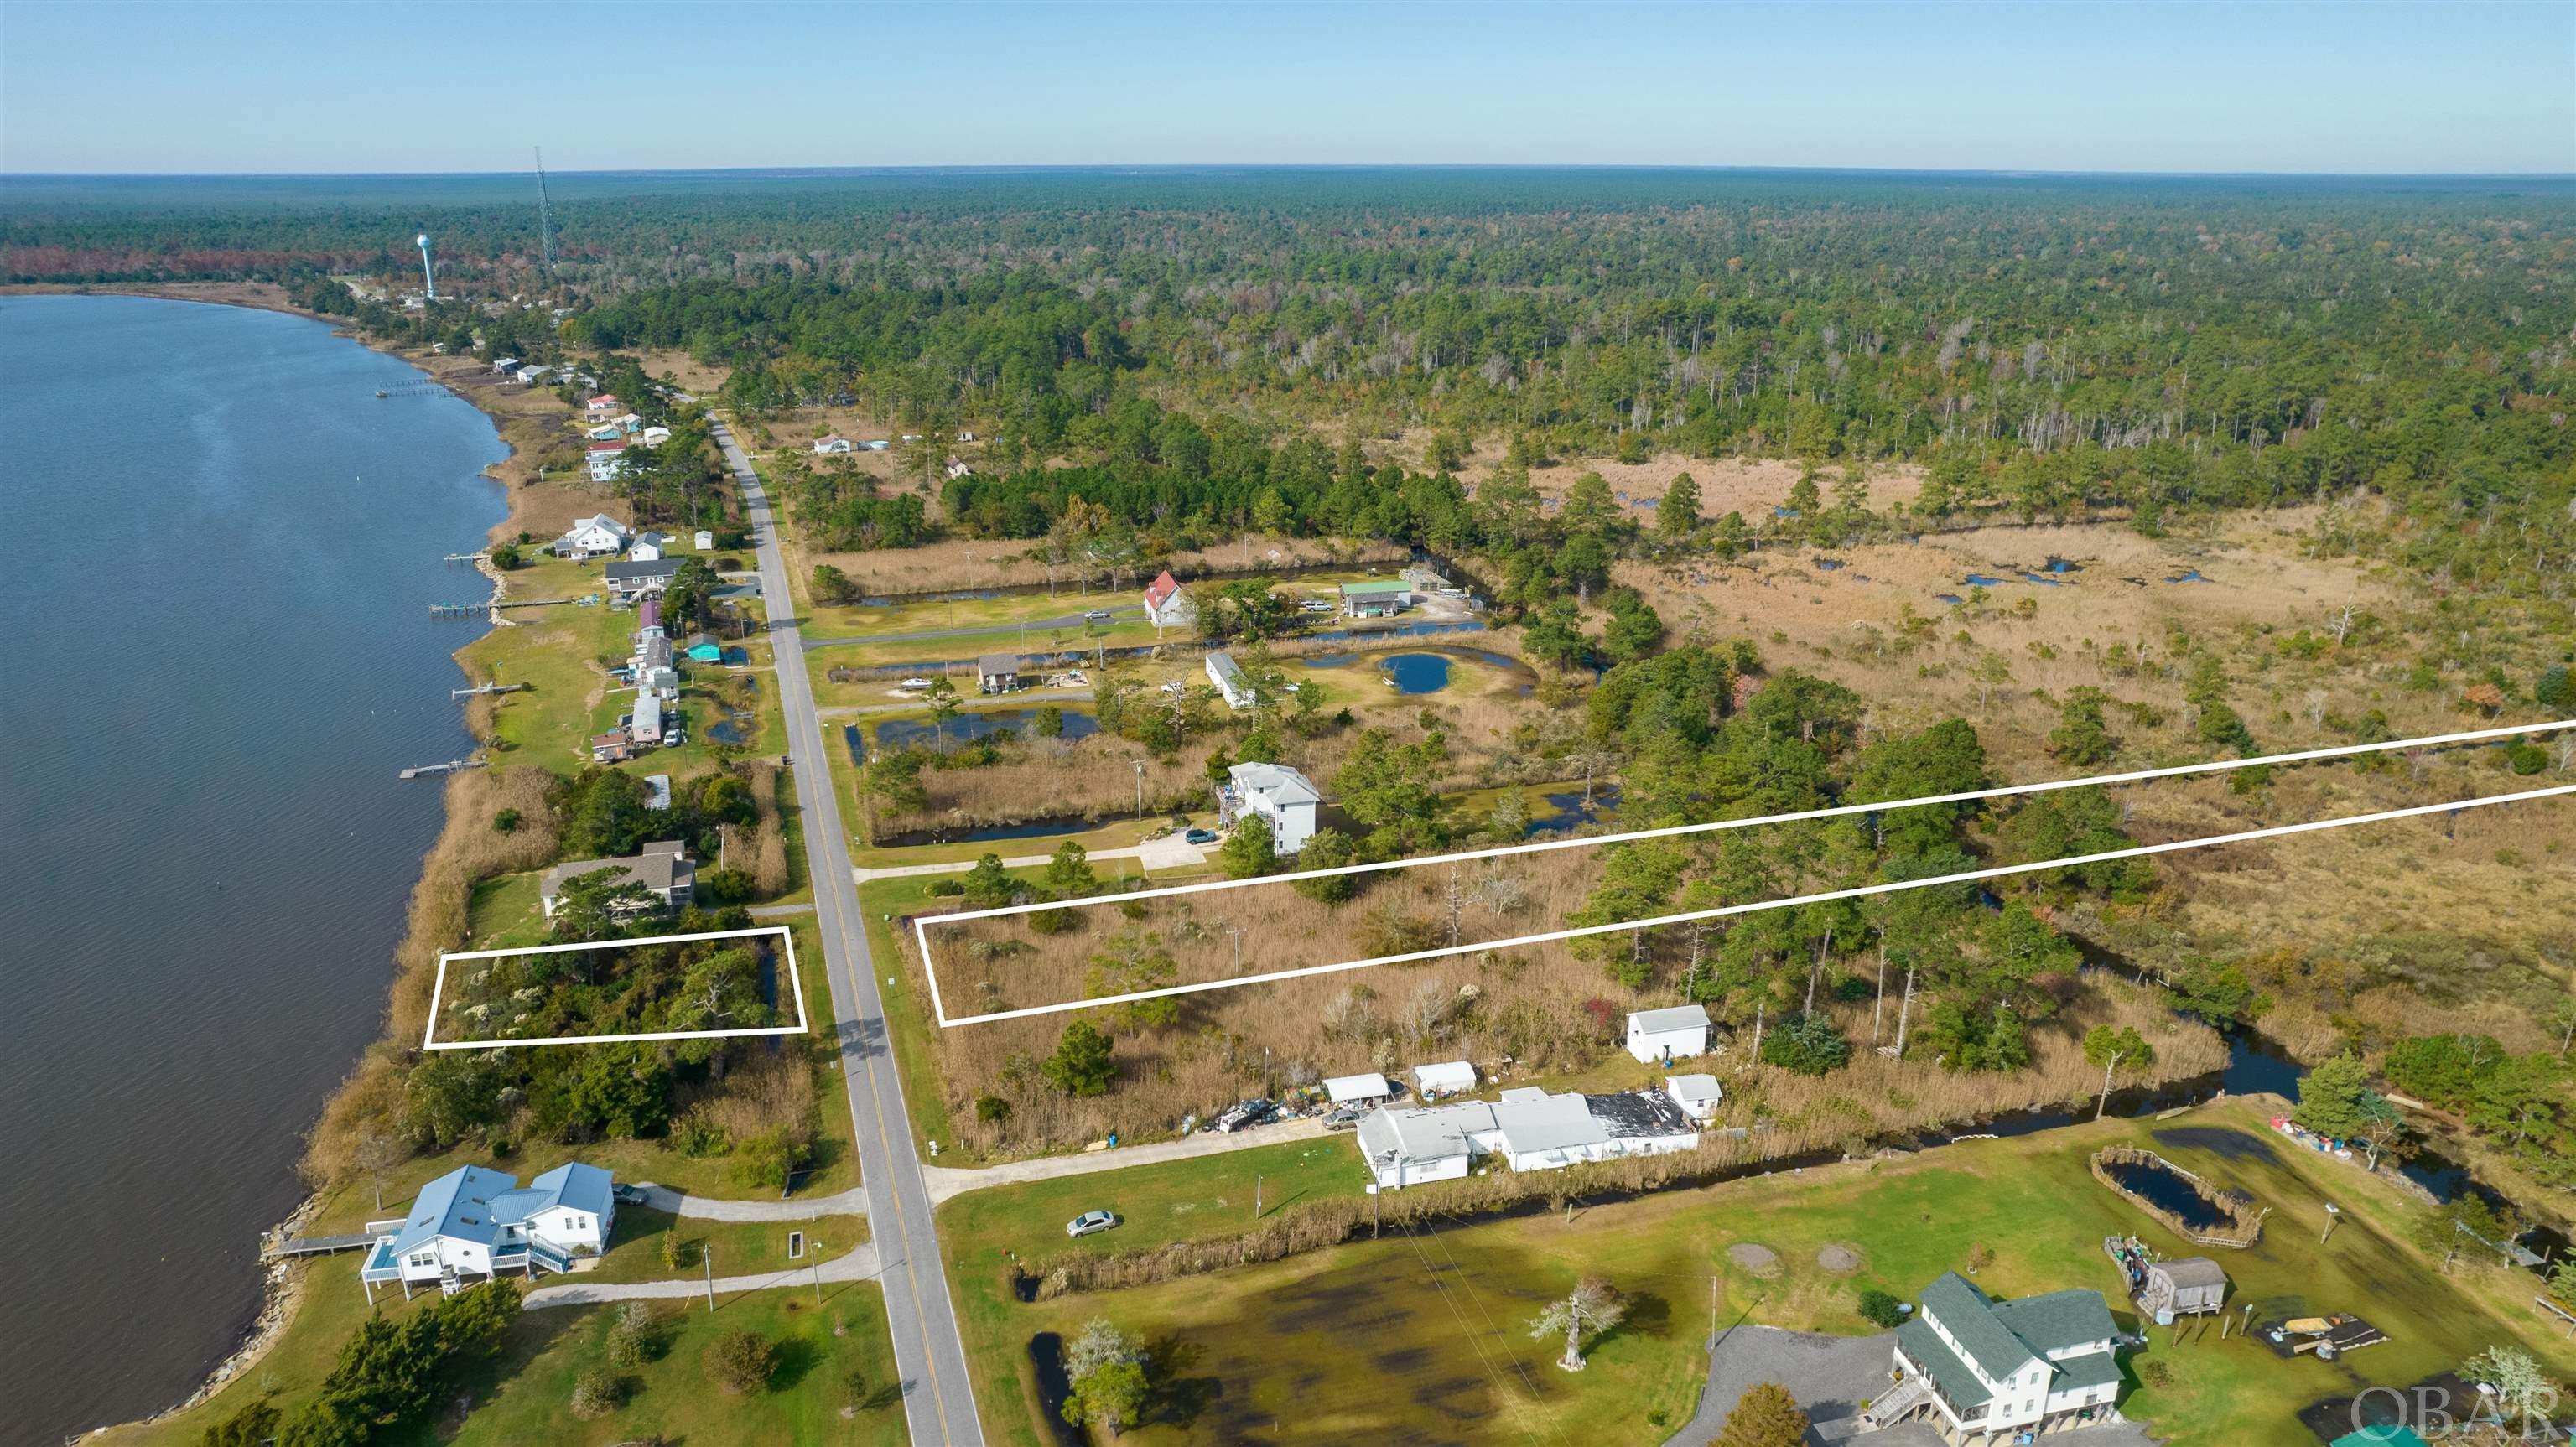 170 Bayview Drive, Stumpy Point, NC 27978, ,Lots/land,For sale,Bayview Drive,116864